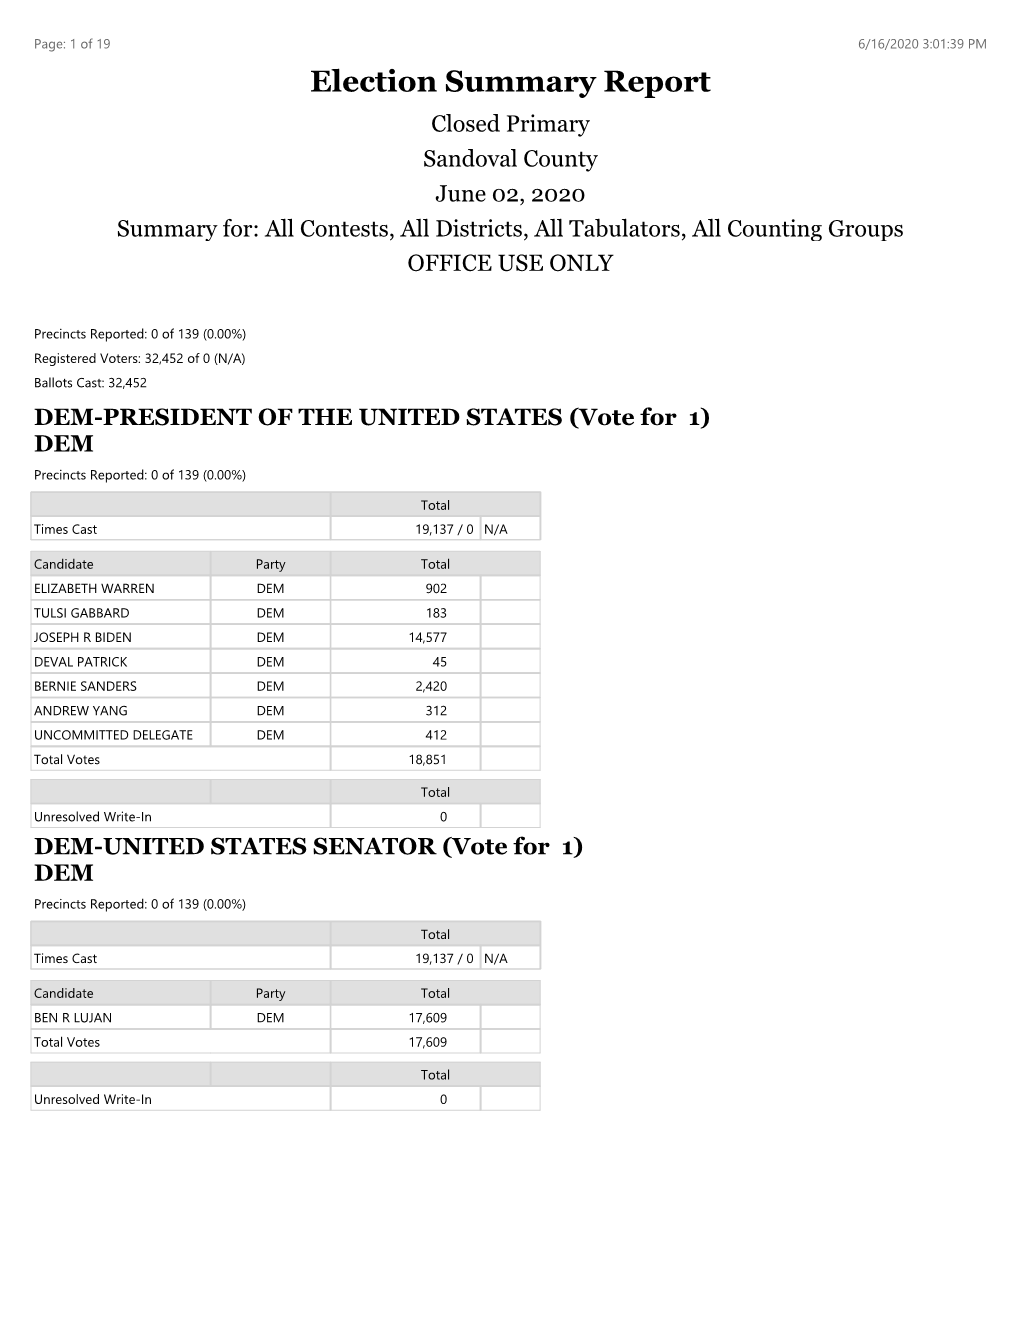 Election Summary Report Closed Primary Sandoval County June 02, 2020 Summary For: All Contests, All Districts, All Tabulators, All Counting Groups OFFICE USE ONLY